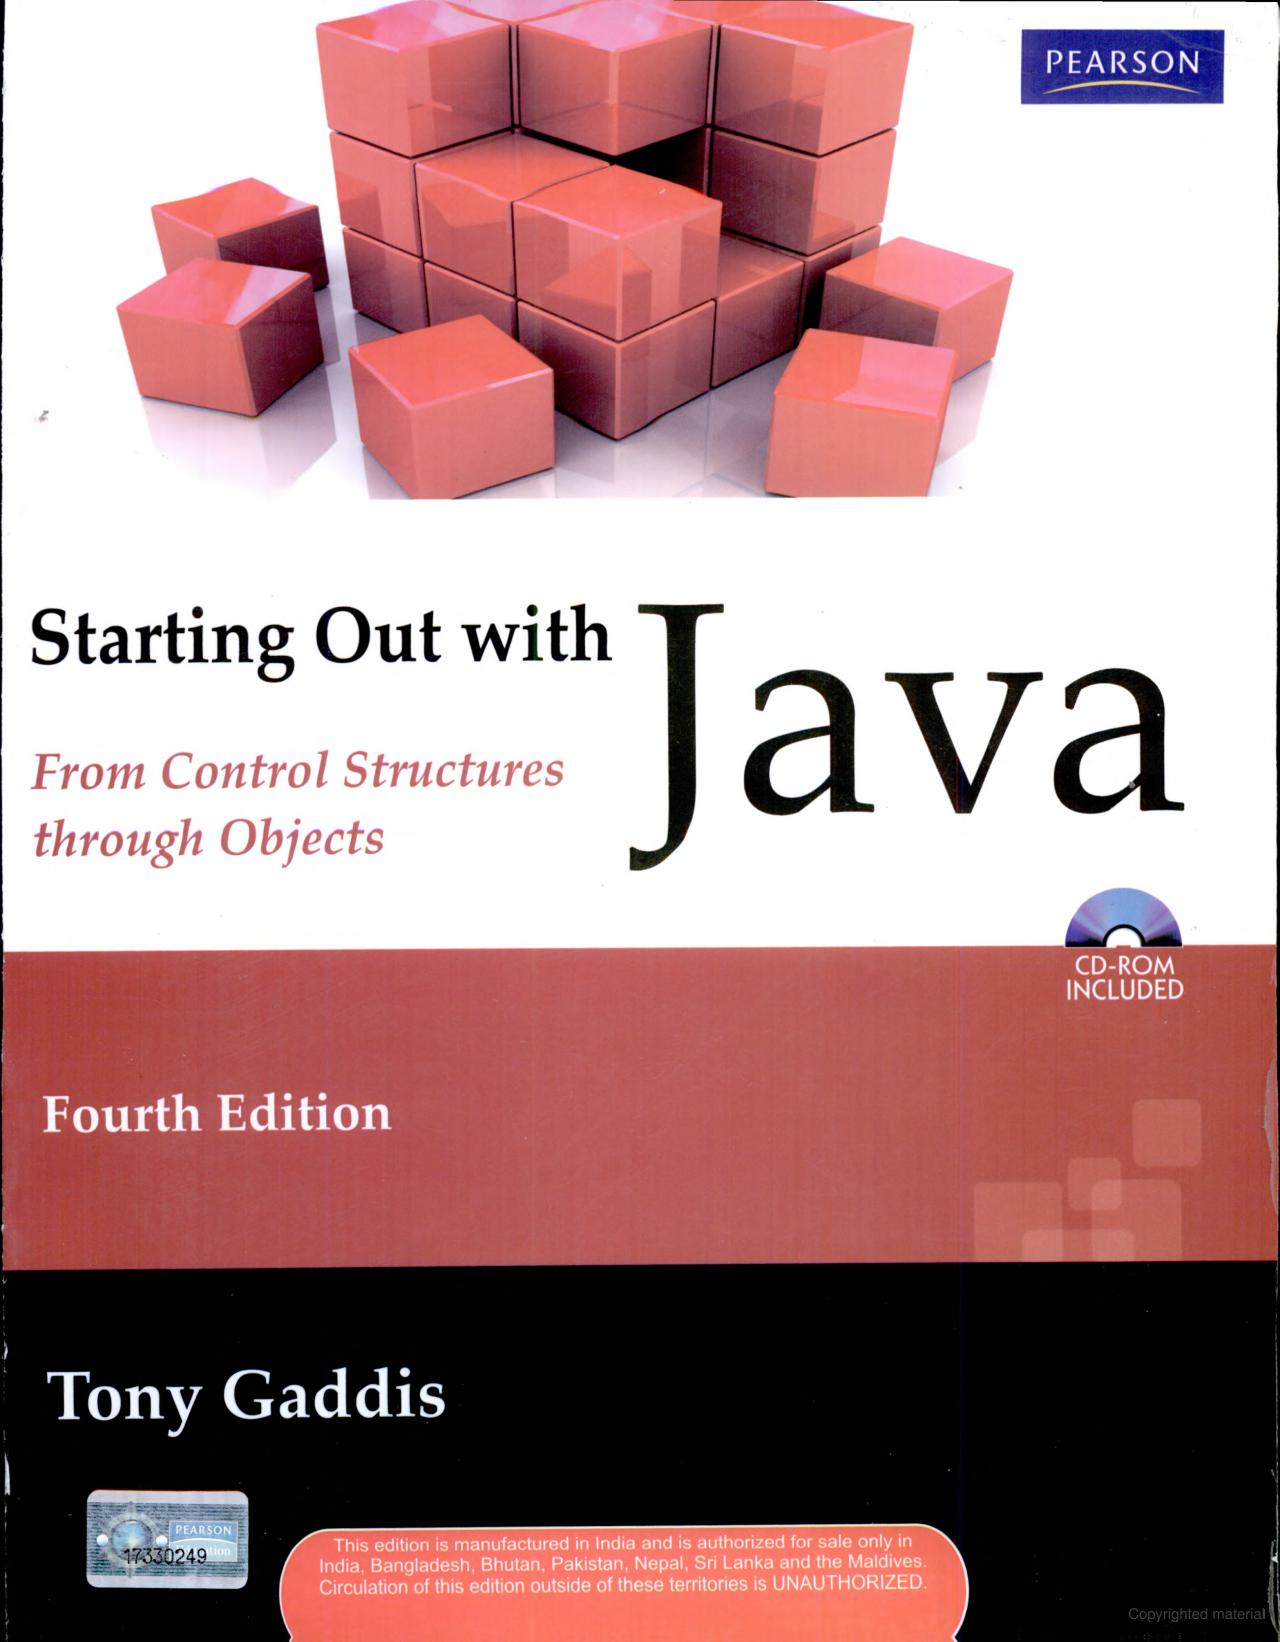 Starting out with java : 